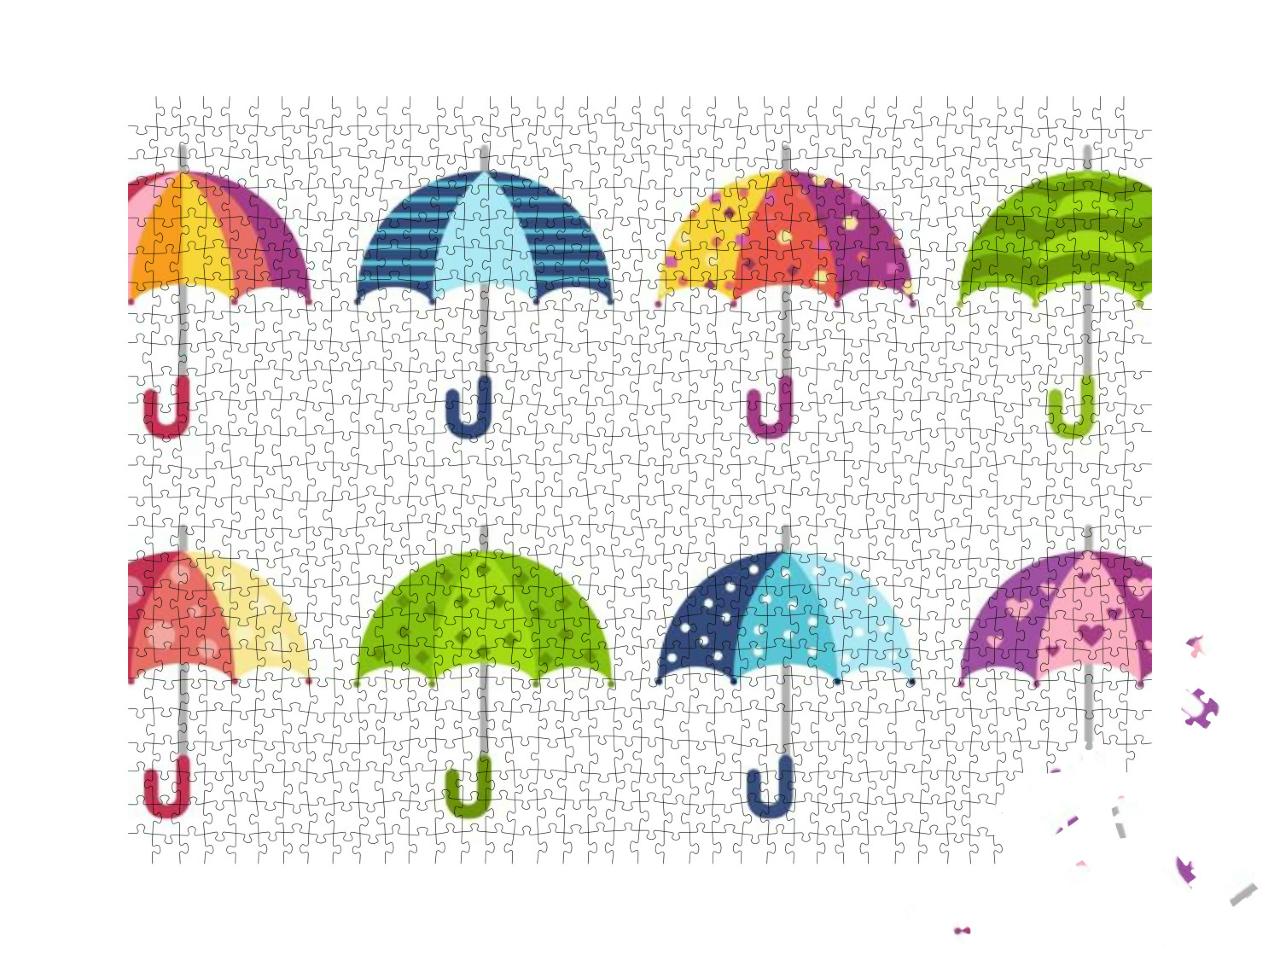 Colorful Cute Pattern Umbrellas Collection in Flat Style... Jigsaw Puzzle with 1000 pieces